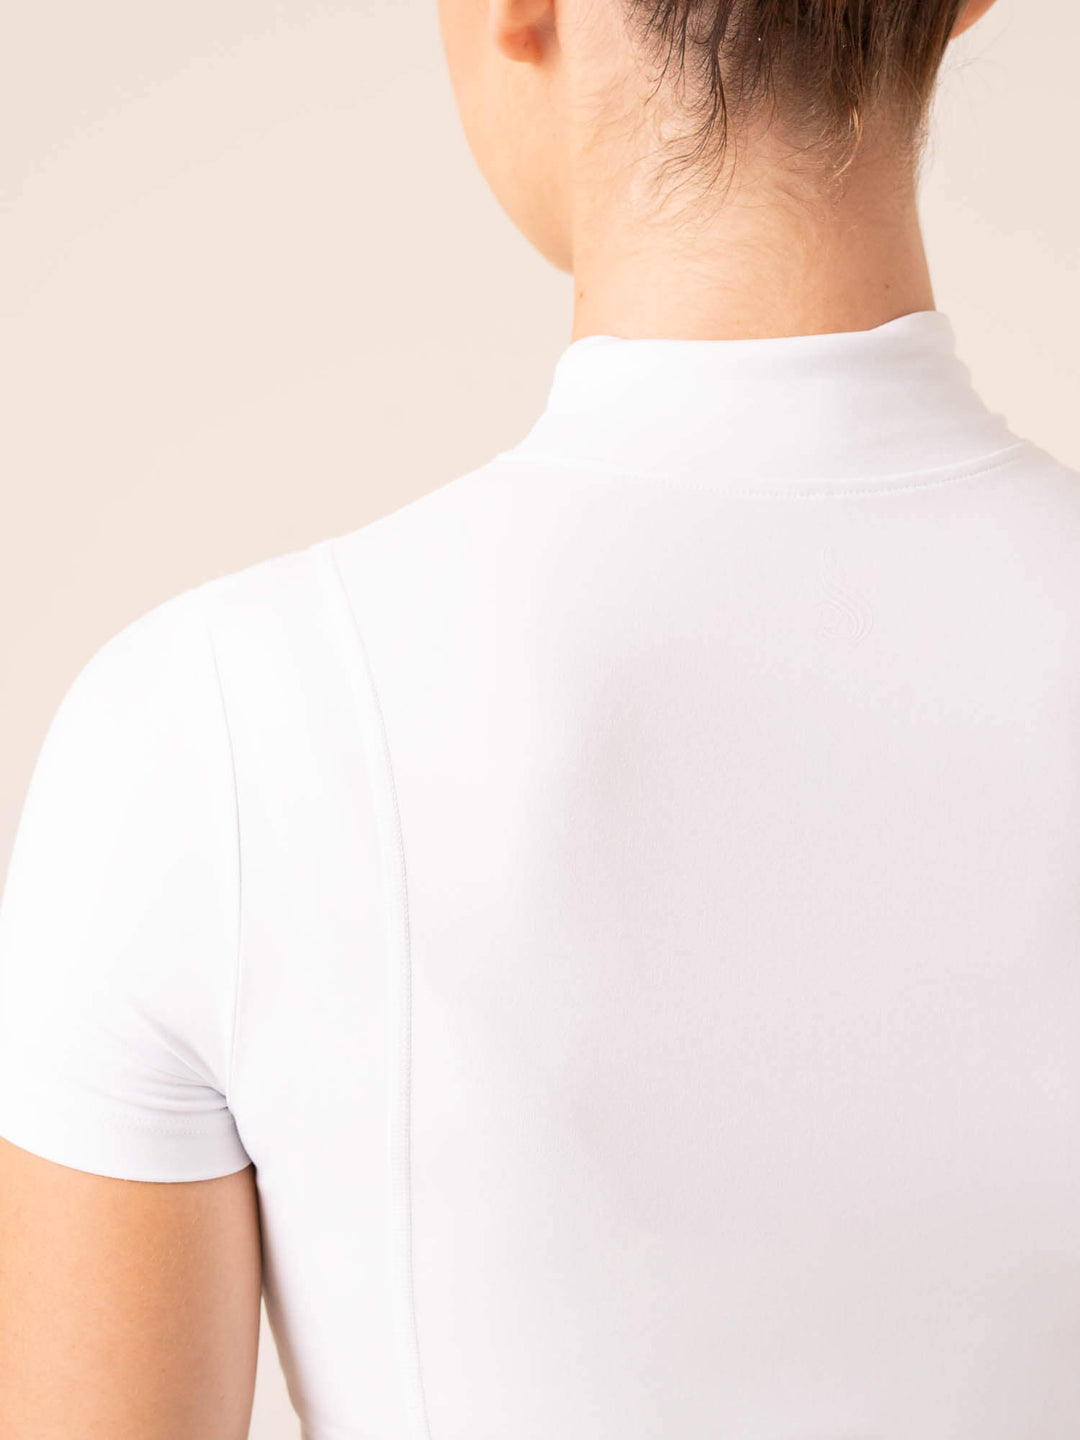 NKD Half Zip Fitted T-Shirt - White Clothing Ryderwear 